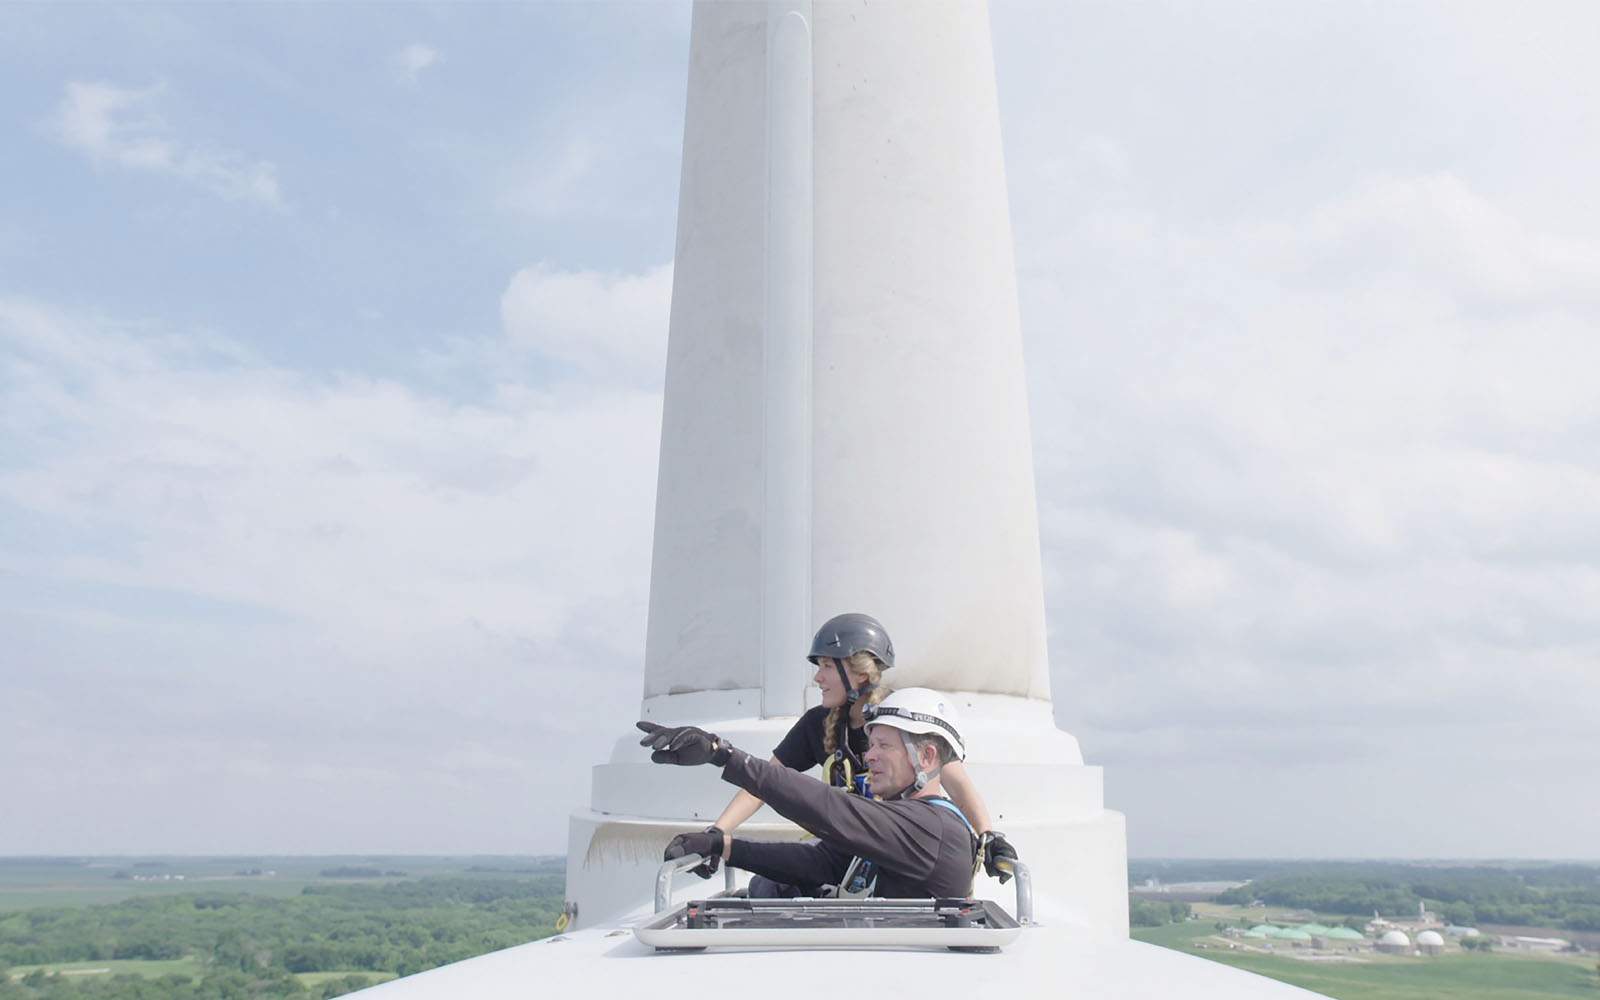 A community college student in Iowa studying wind energy, who is featured in Paris to Pittsburgh, looks out from the top of a turbine with her father.